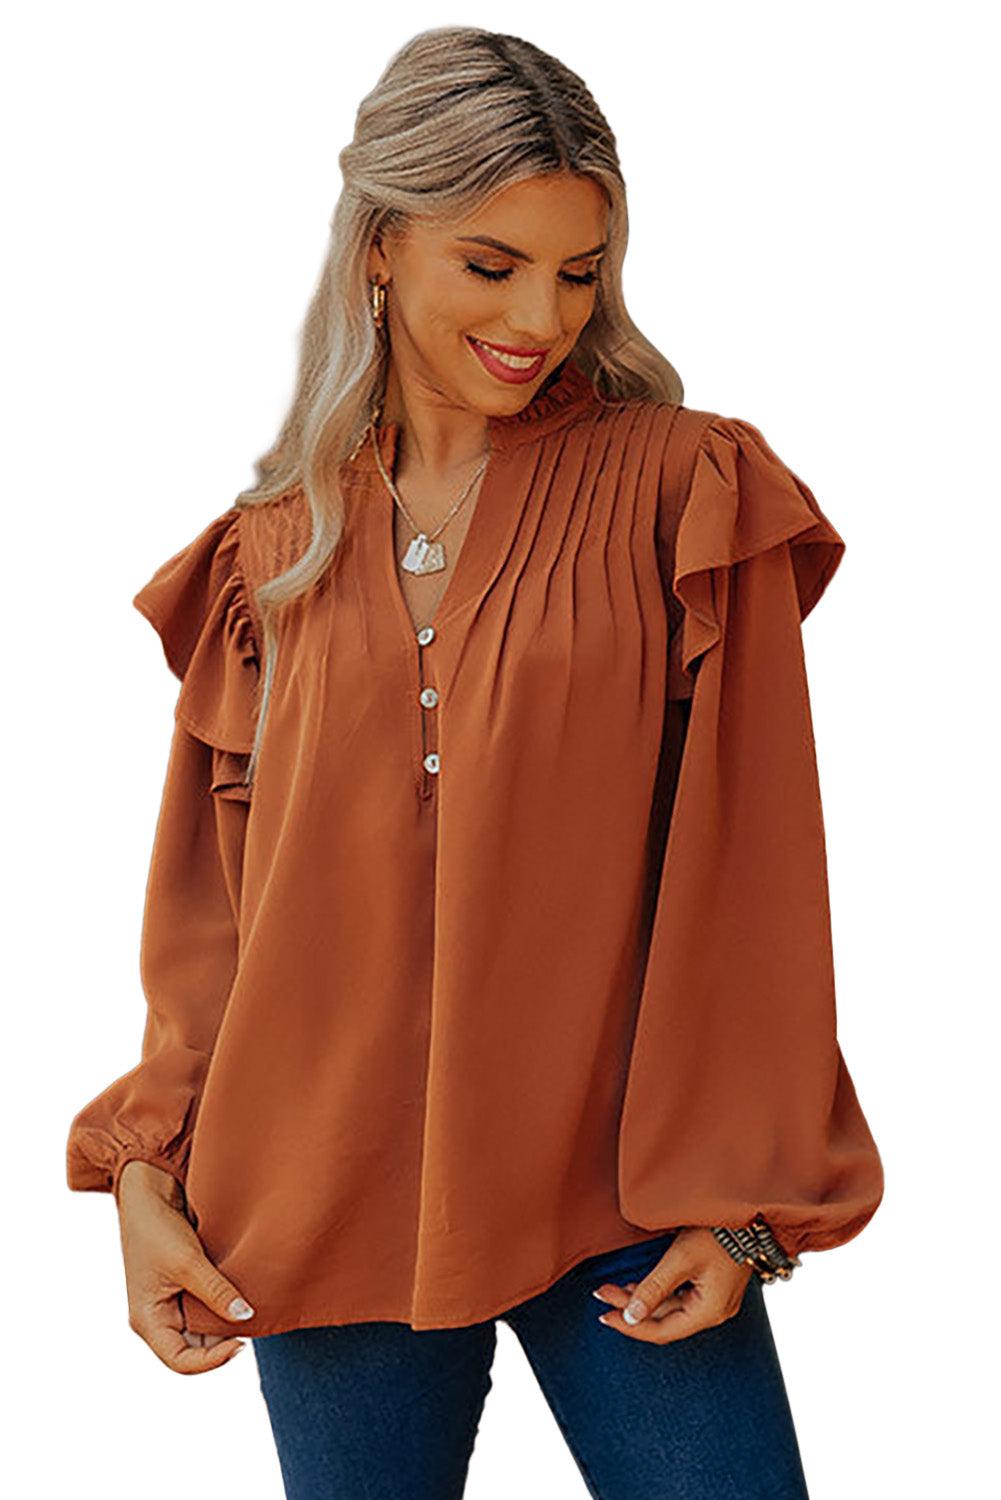 Ruffled Pleated Buttoned V Neck Blouse - L & M Kee, LLC